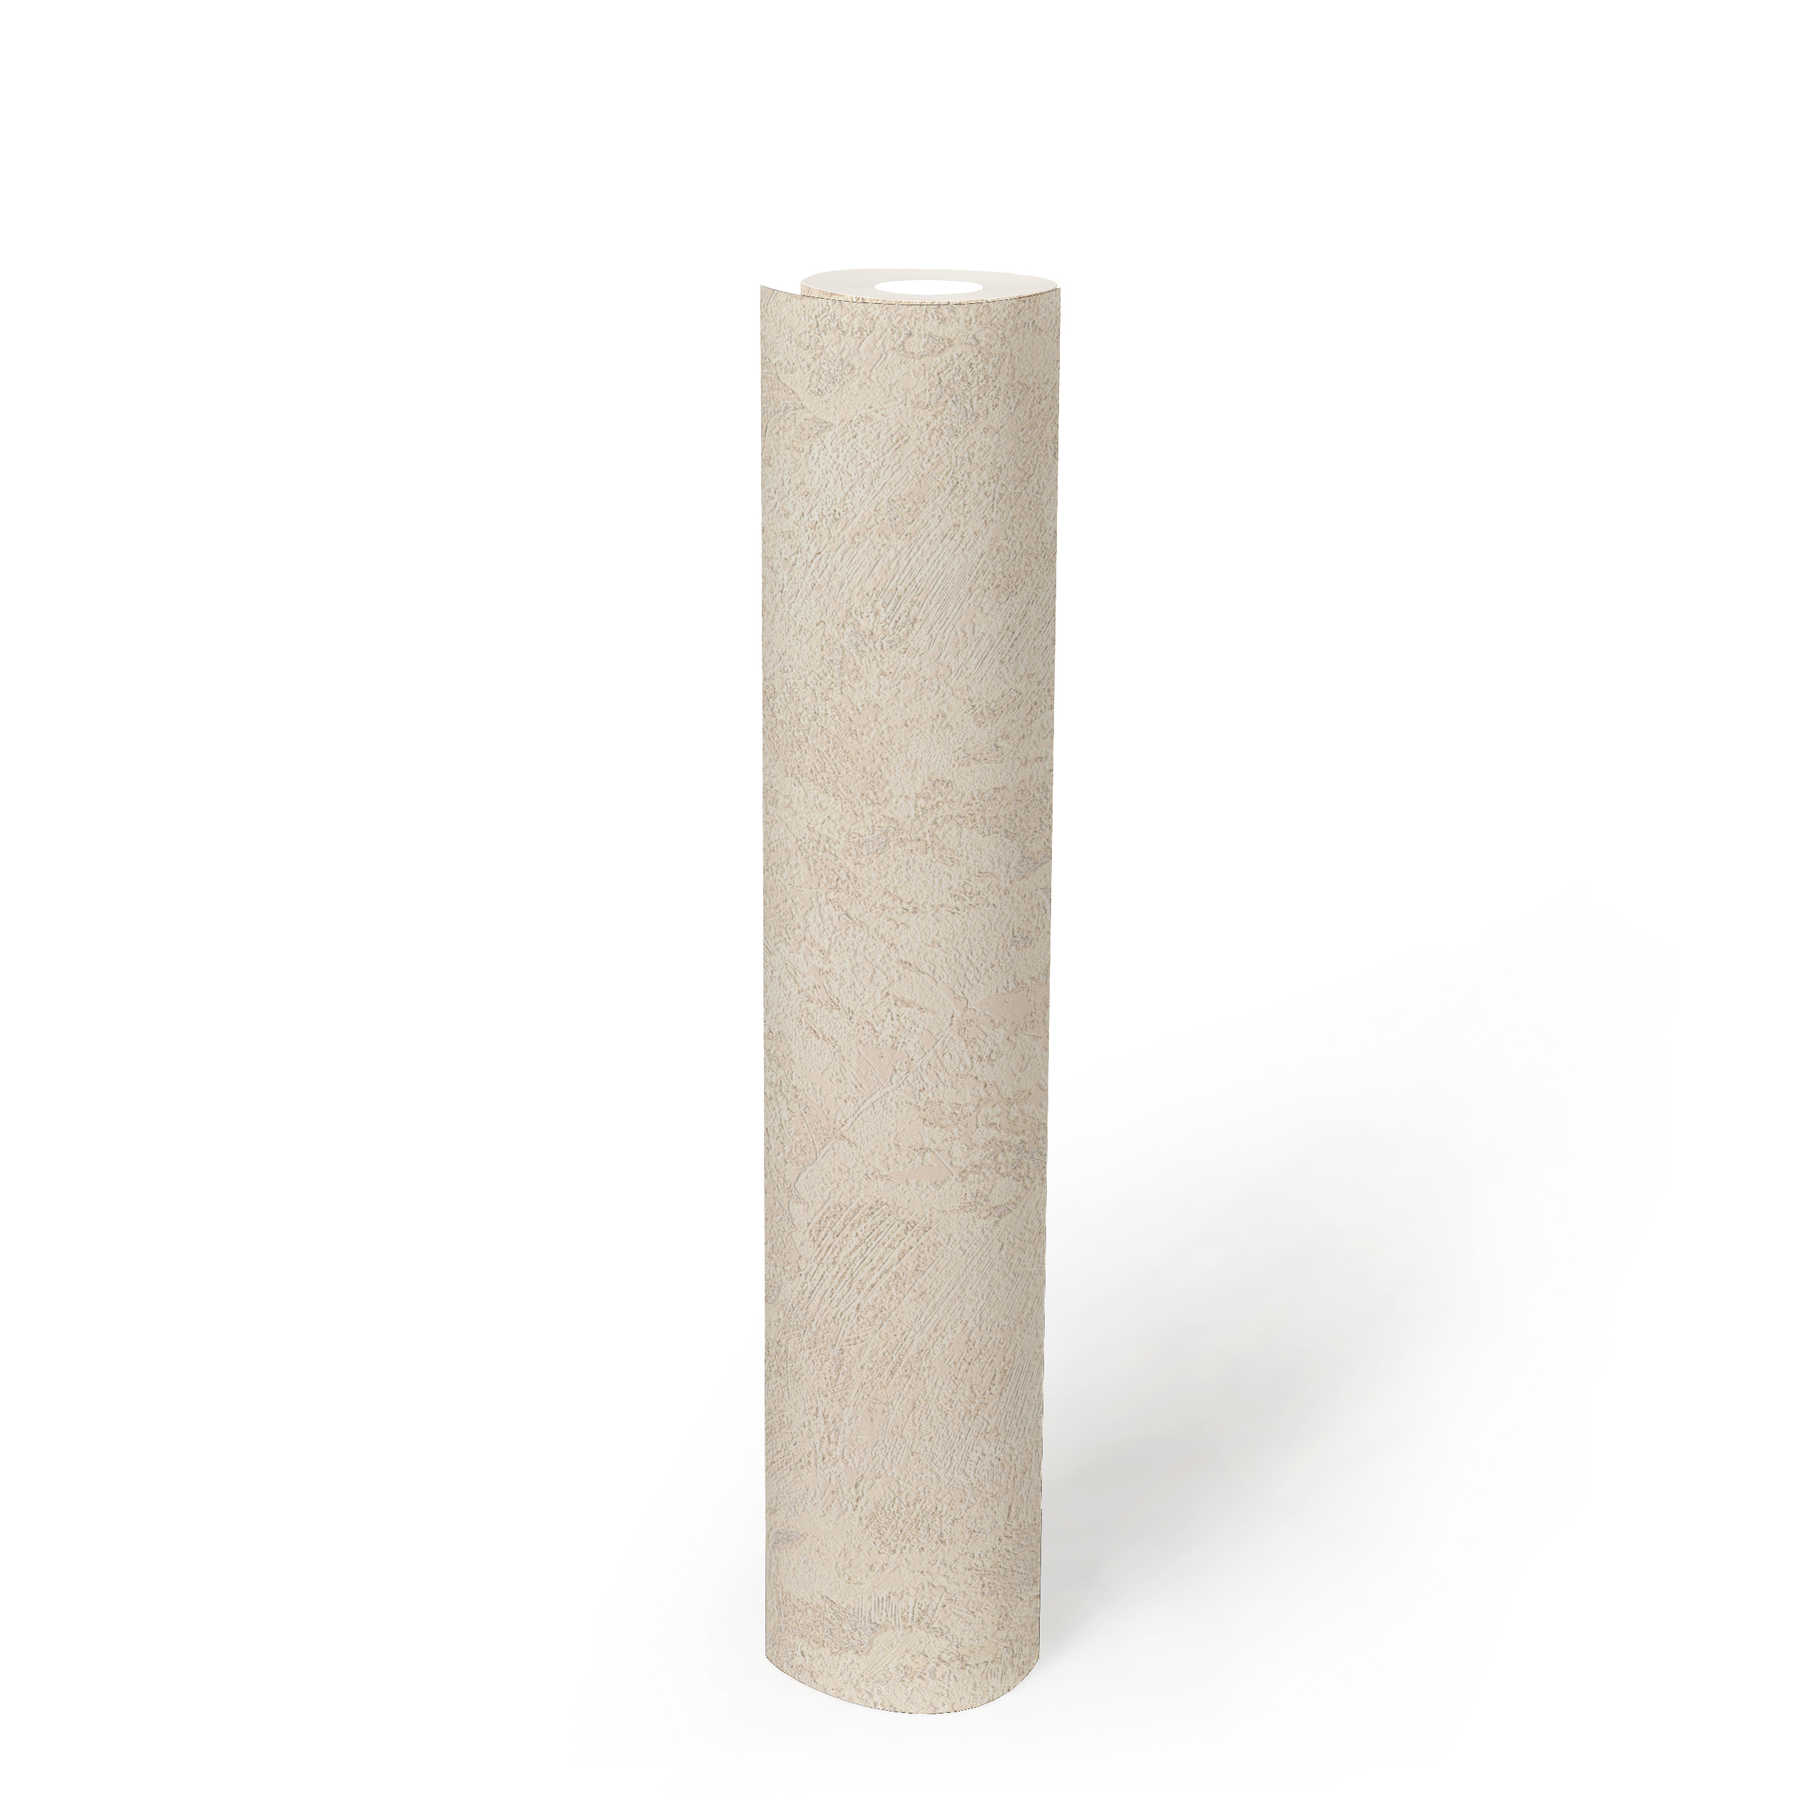             Non-woven wallpaper plaster look with roughcast texture - cream
        